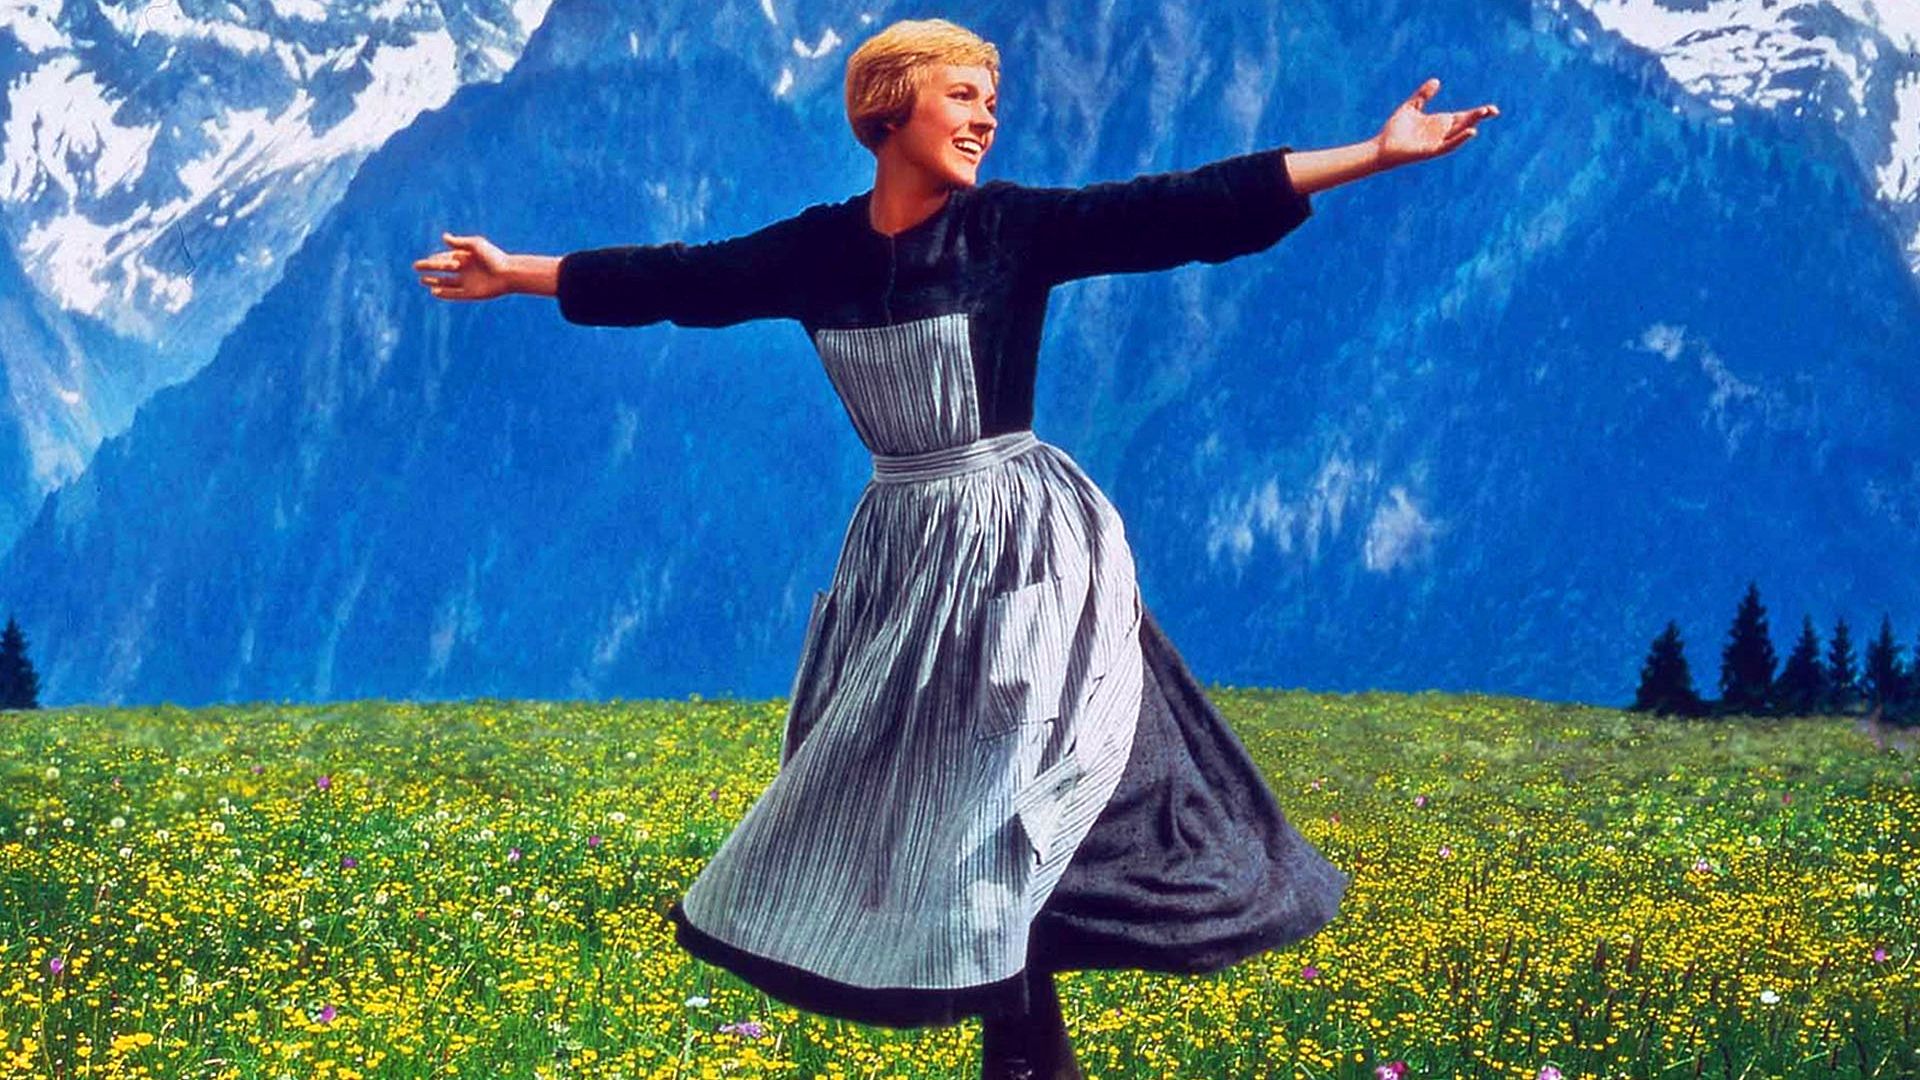 The Sound of Music background